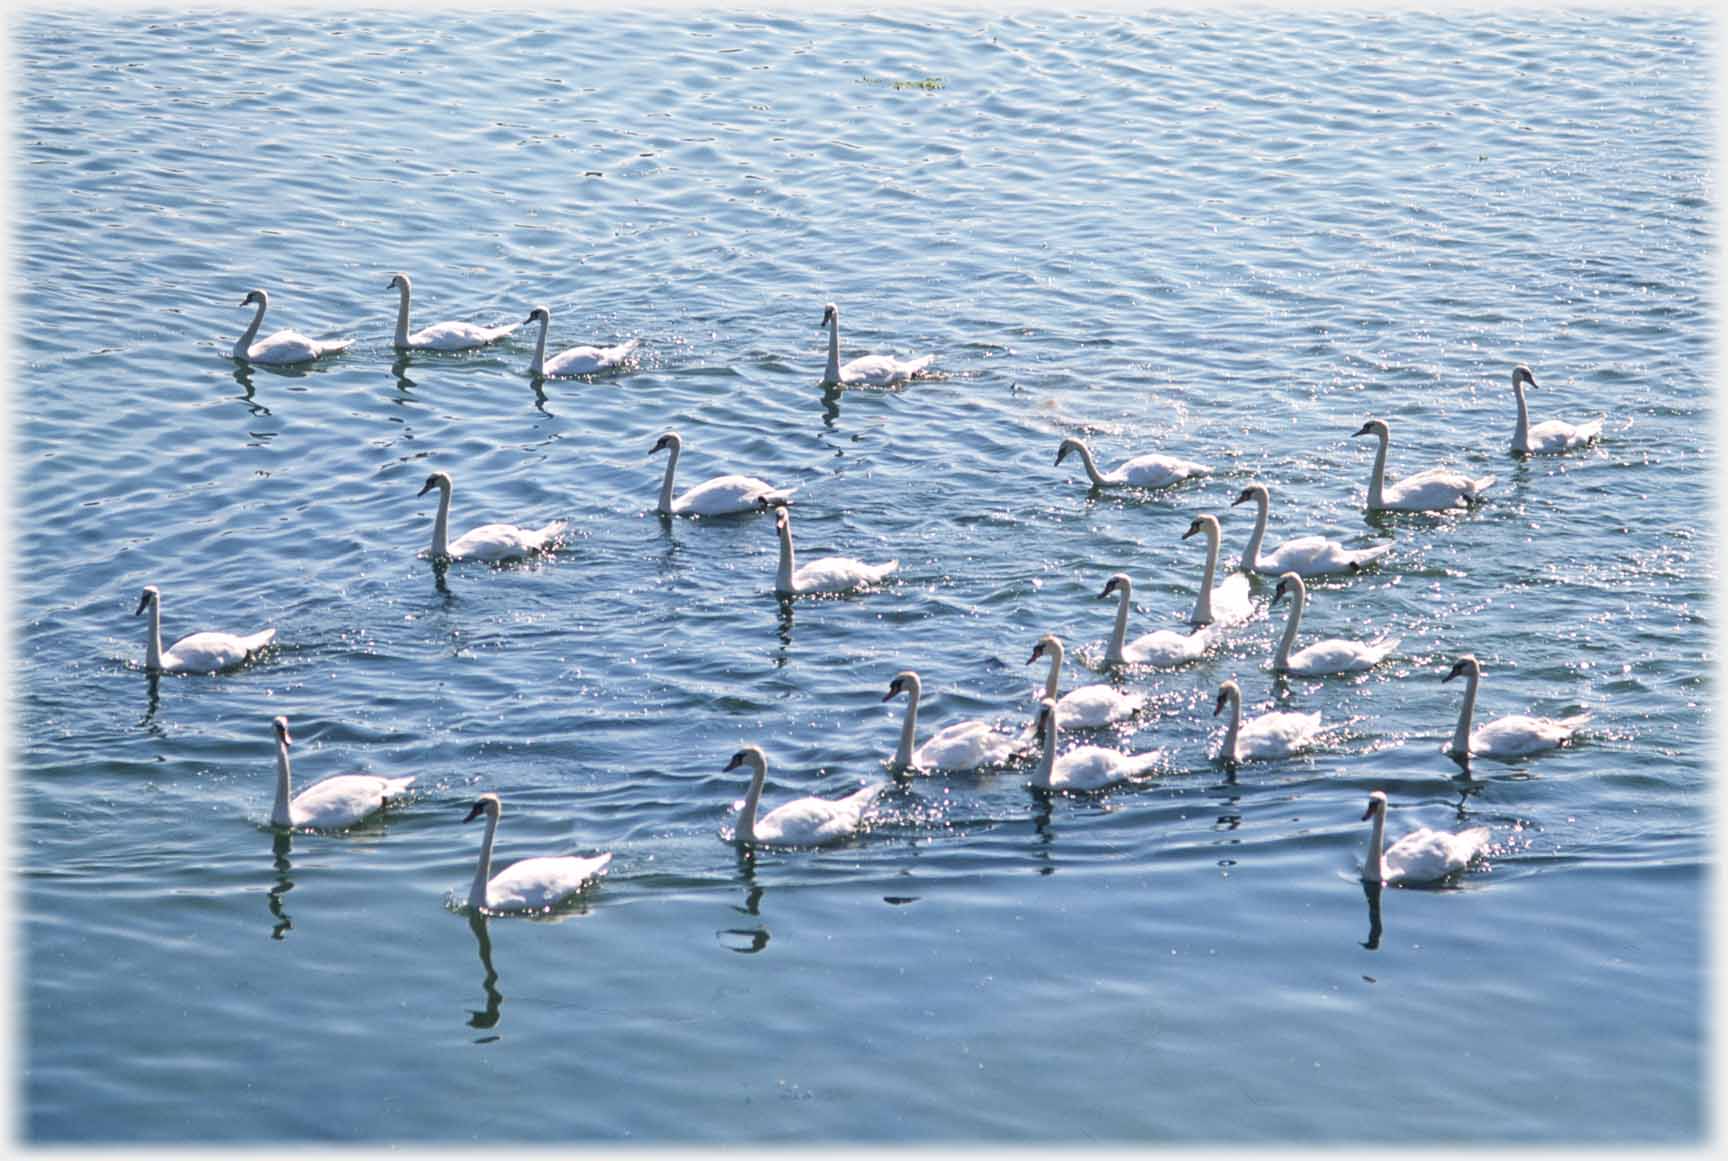 A flock of swans swimming together purposefully.